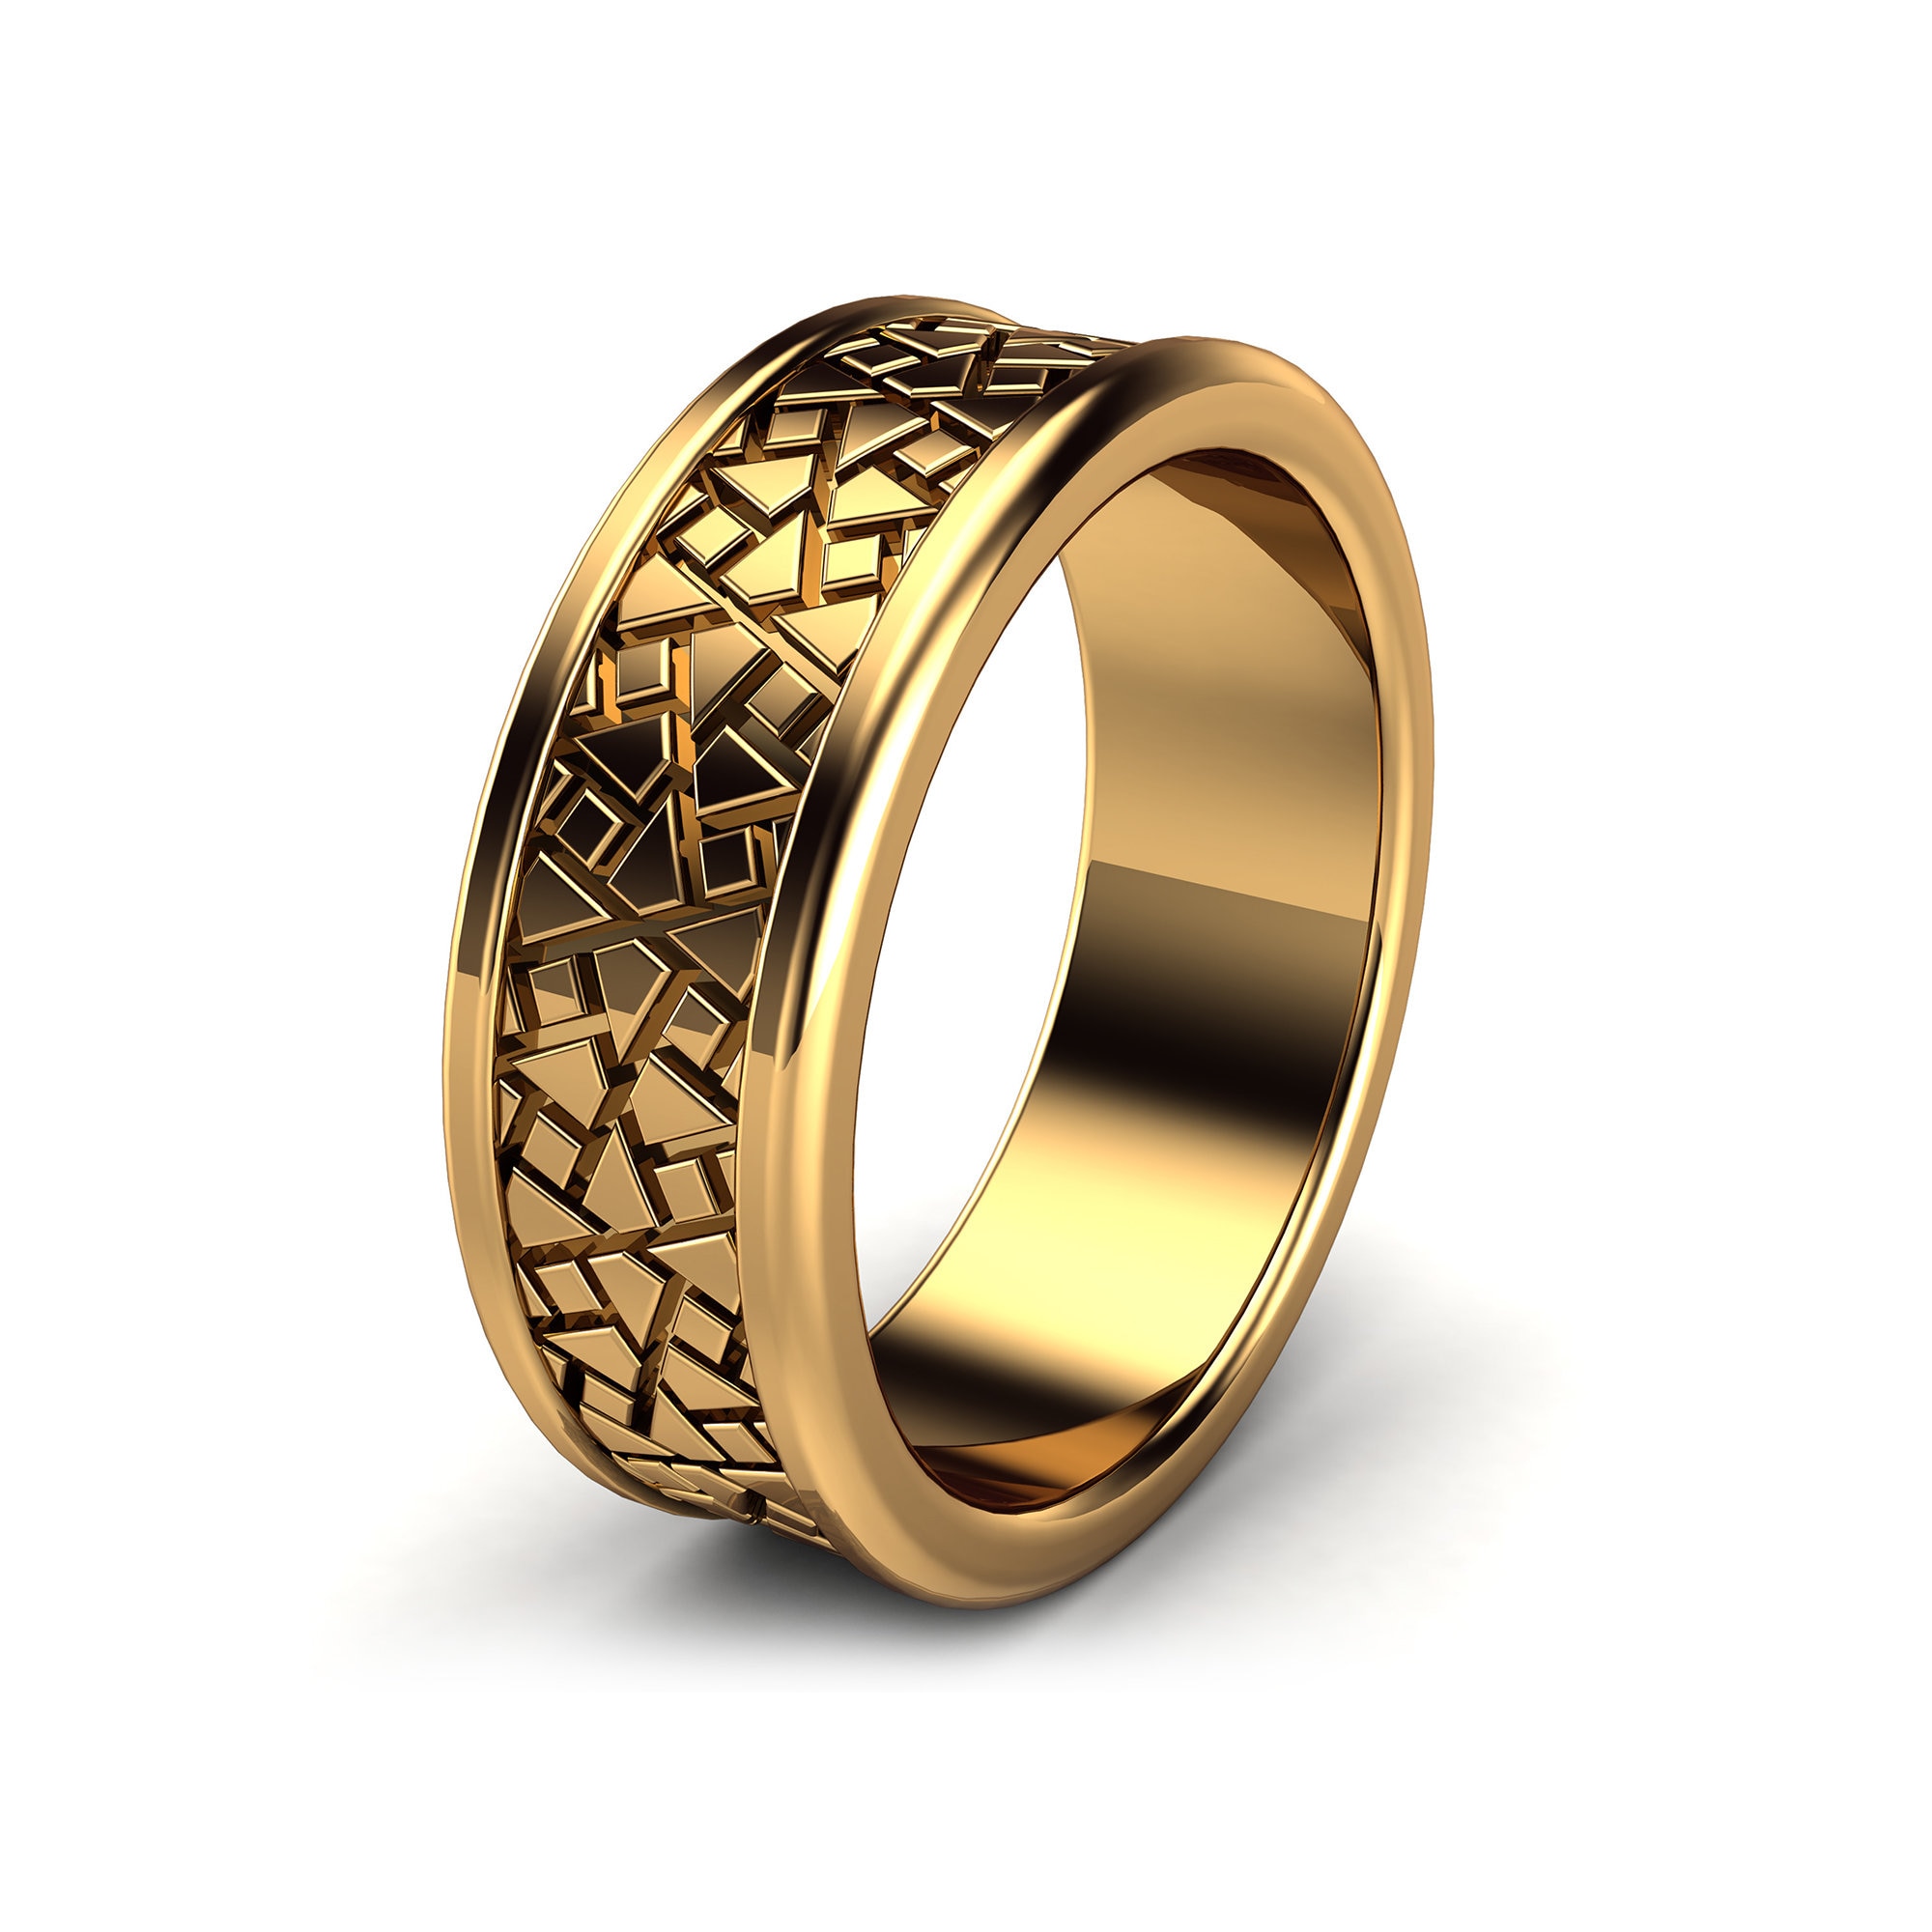 Iced Out Micro Paved 18k Yellow Gold Filled Mens Gold Wedding Rings Size 13  Classic Handsome Finger Band For Weddings And Engagements Gi256x From  Efwmz, $23.12 | DHgate.Com